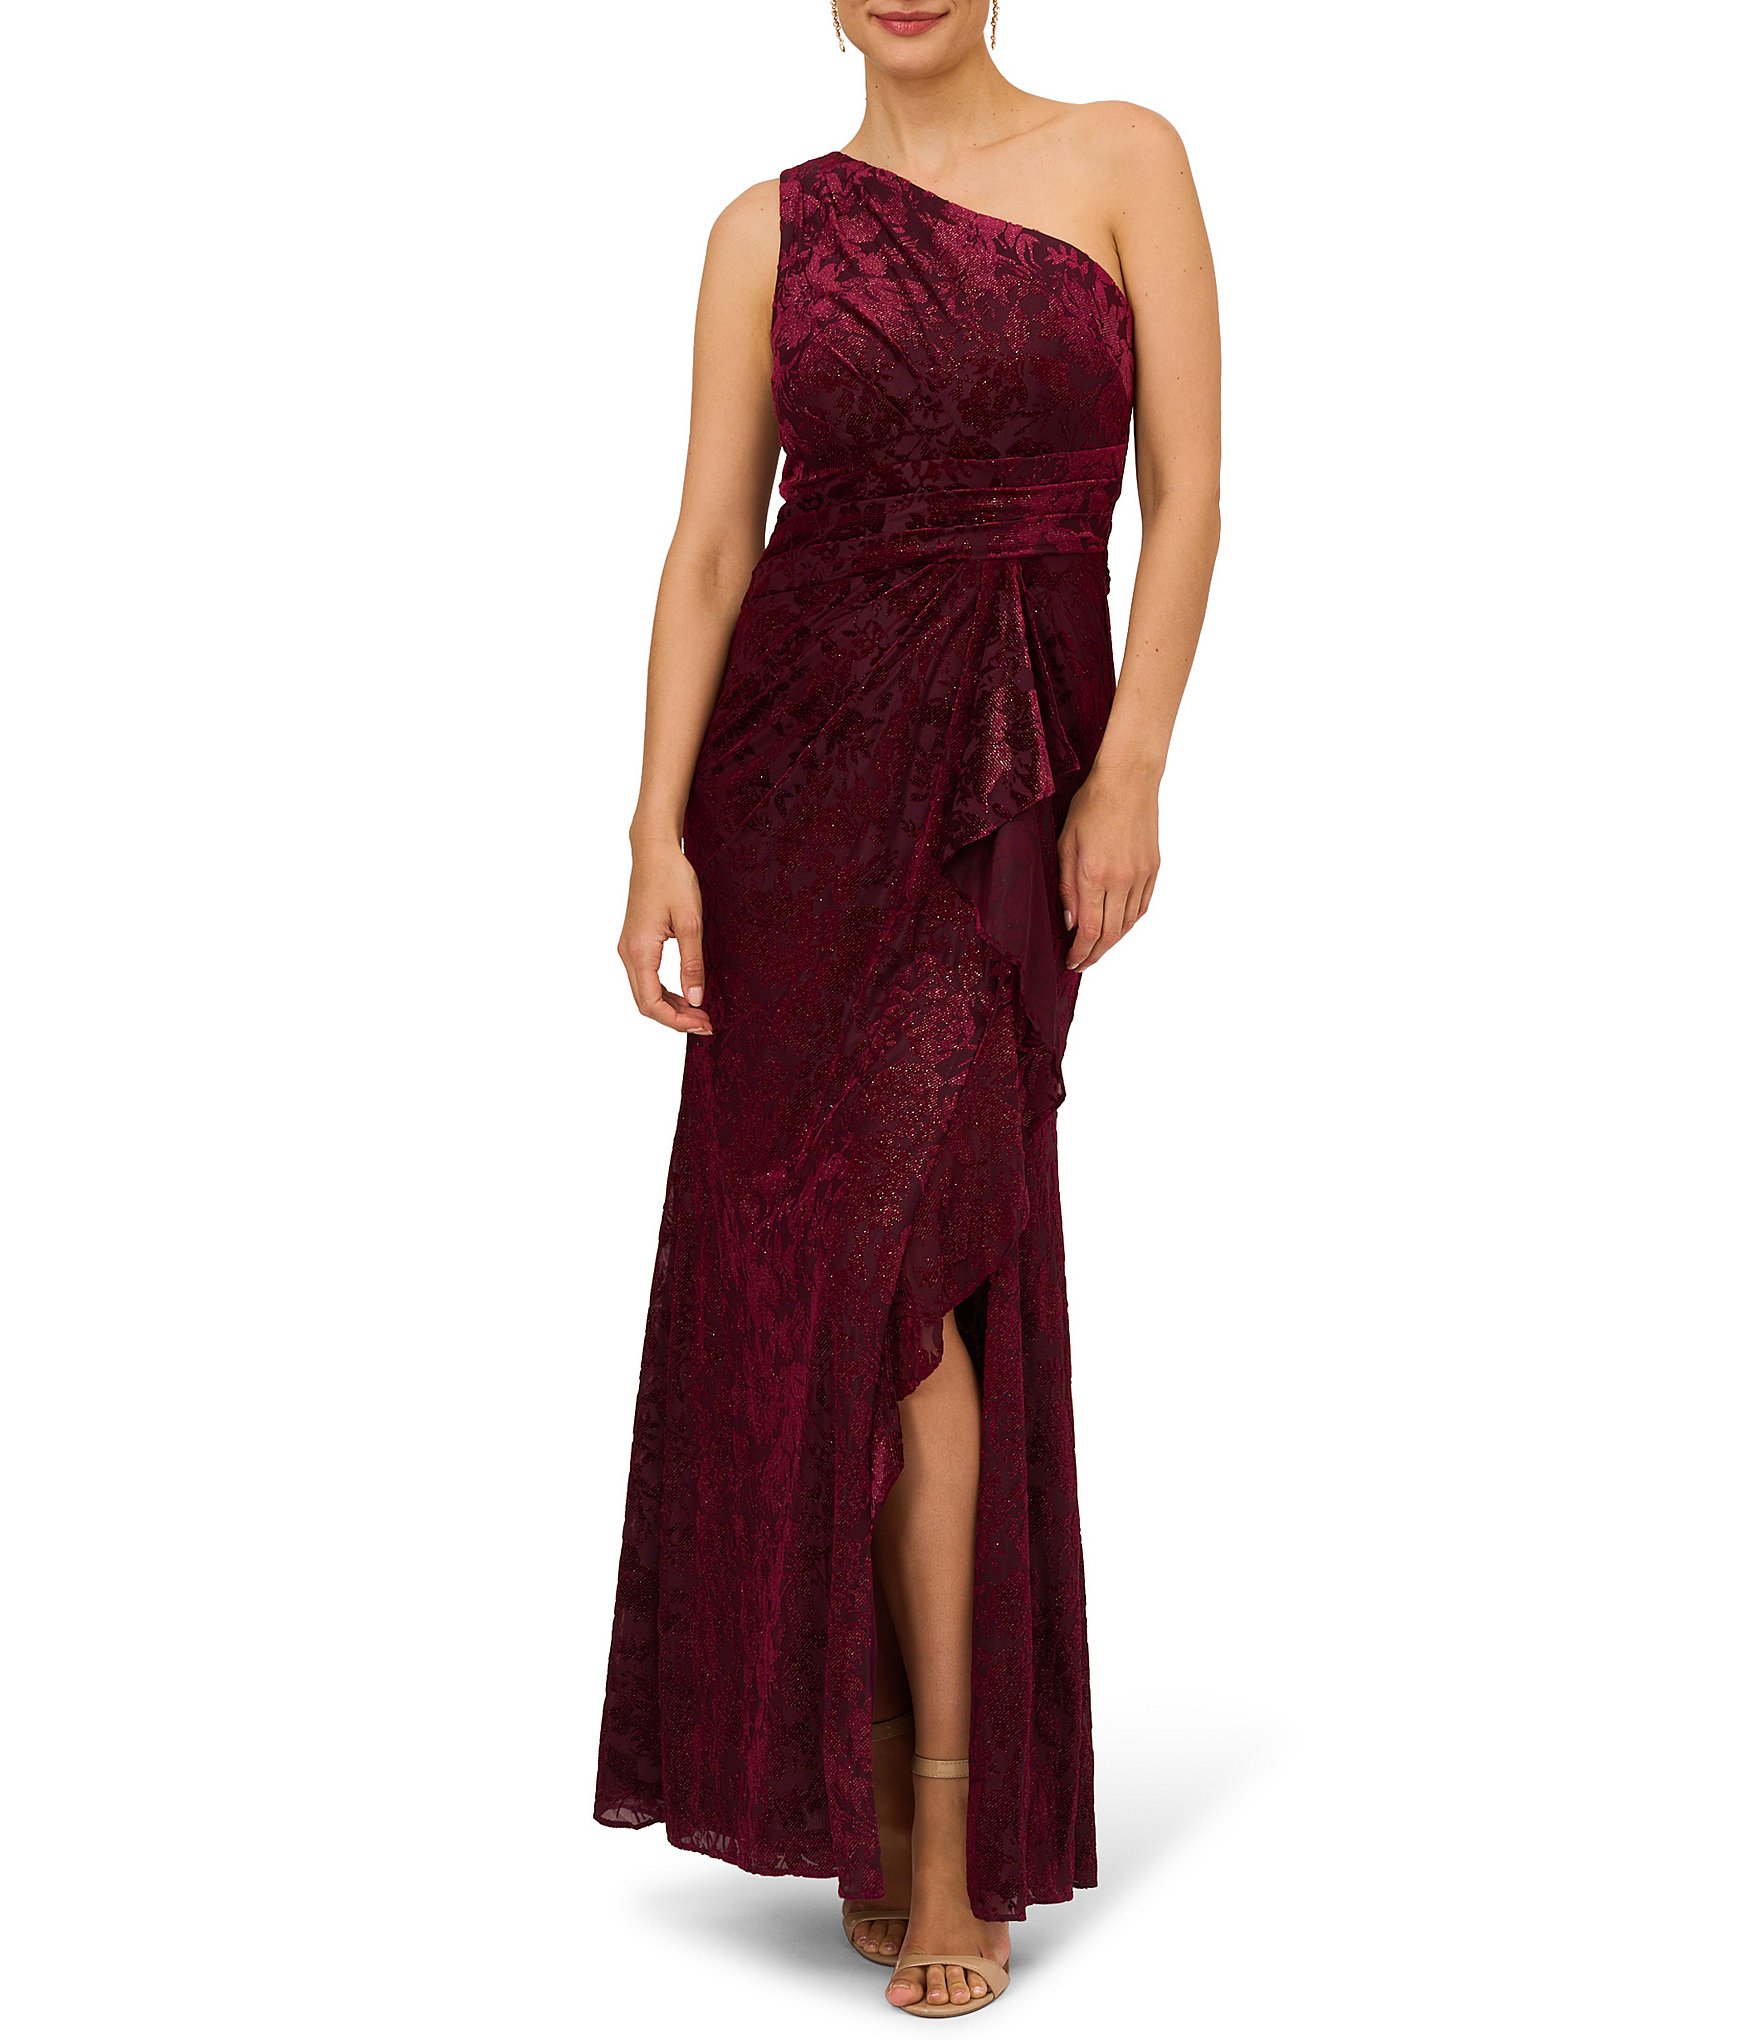 B233072 Stunning Fit & Flare One Shoulder Stretch Velvet Gown with